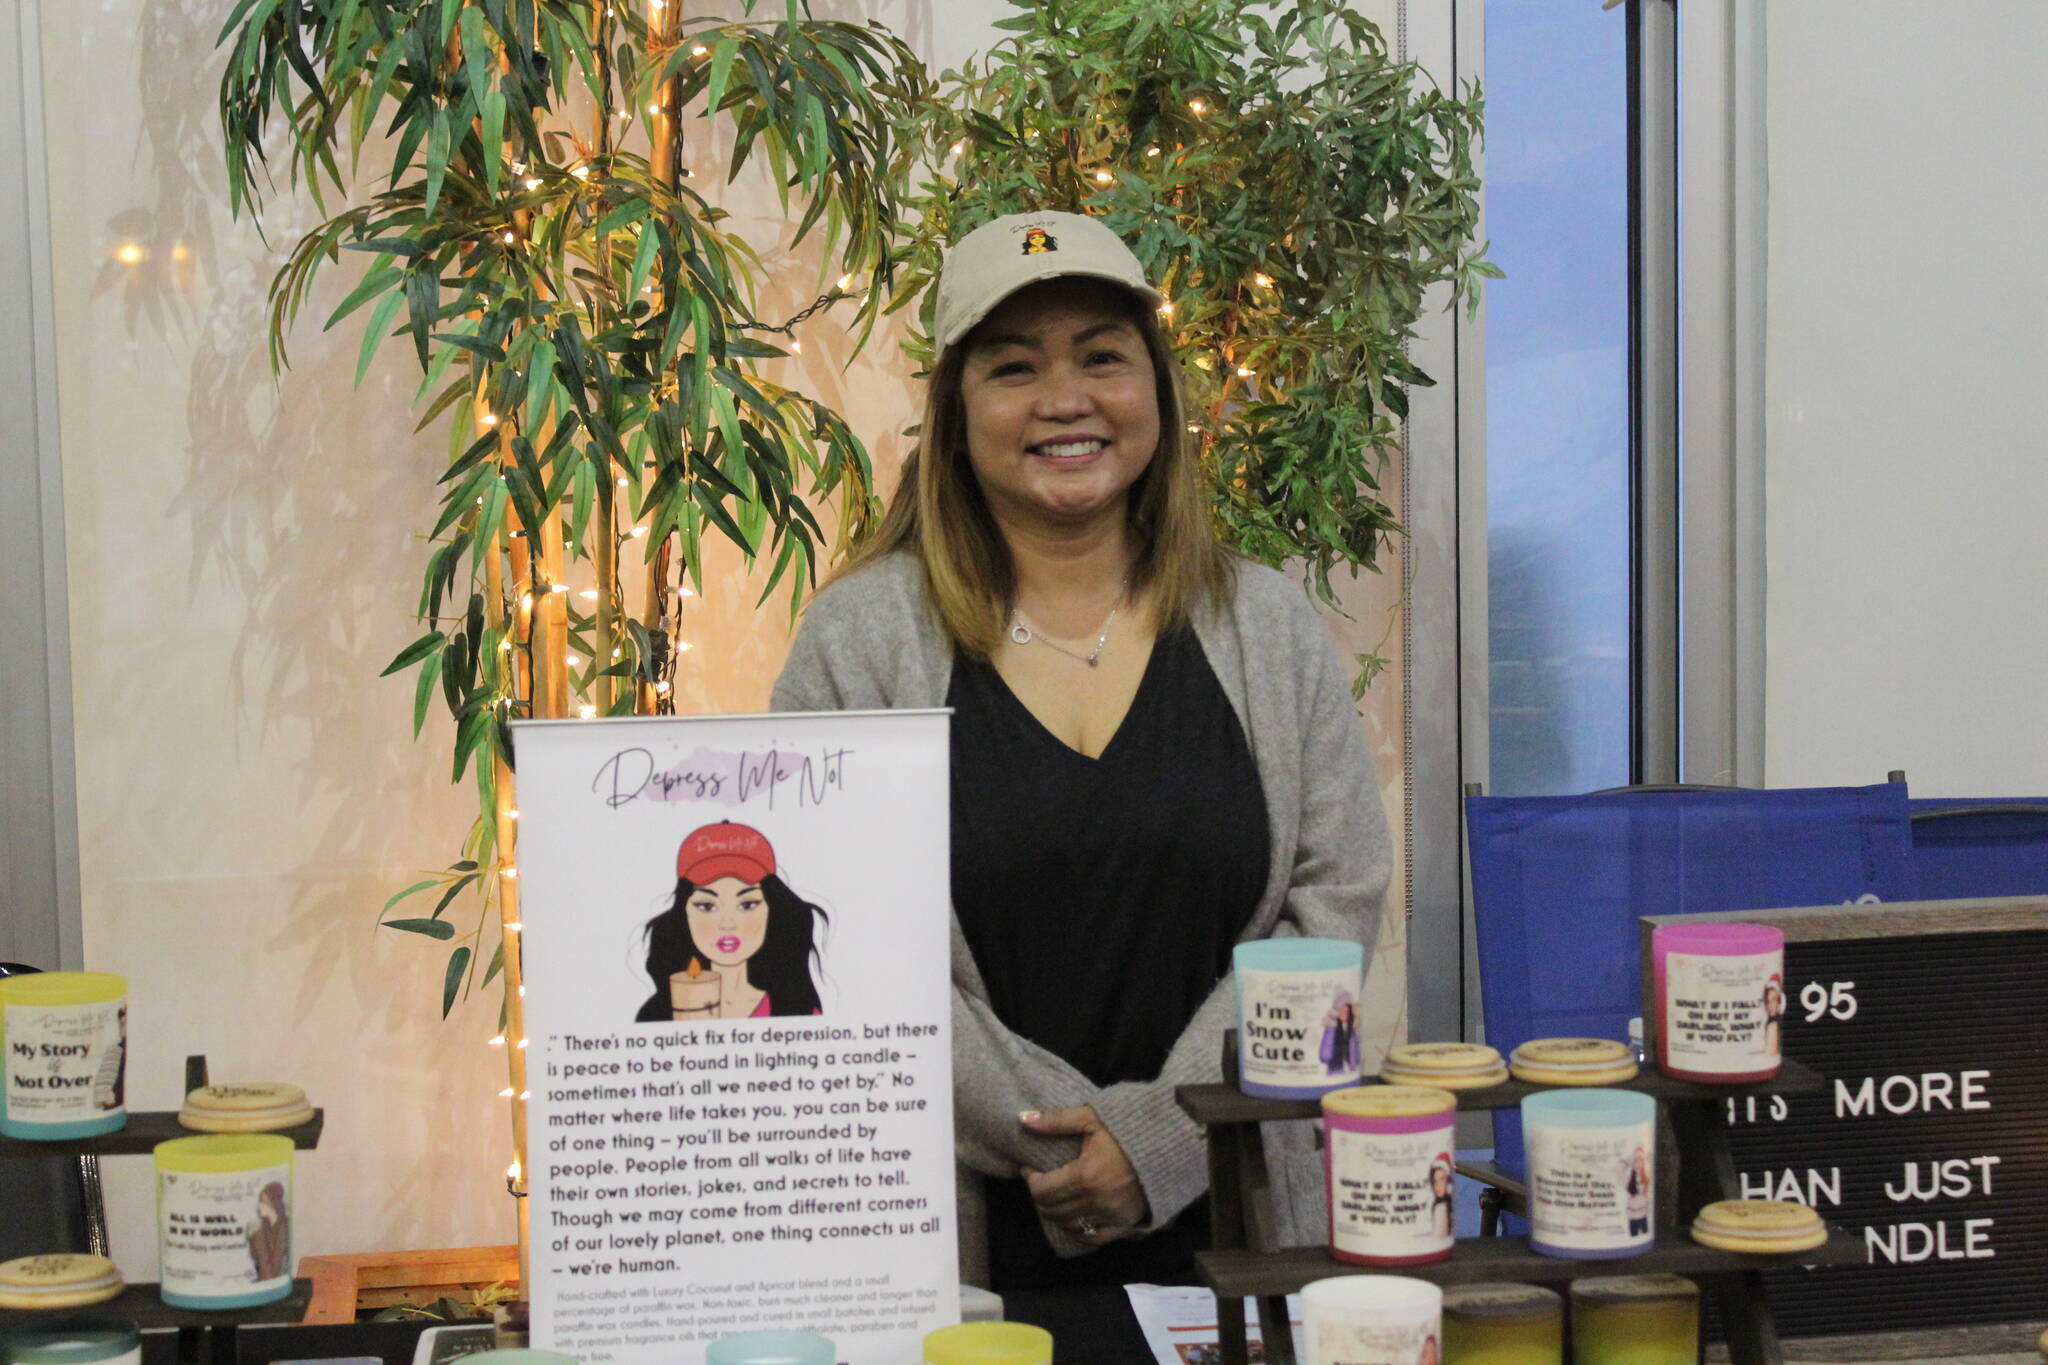 Divina of Depress Me Not Candles is all smiles during Renton's Small Business Saturday. Photo by Bailey Jo Josie/Sound Publishing.